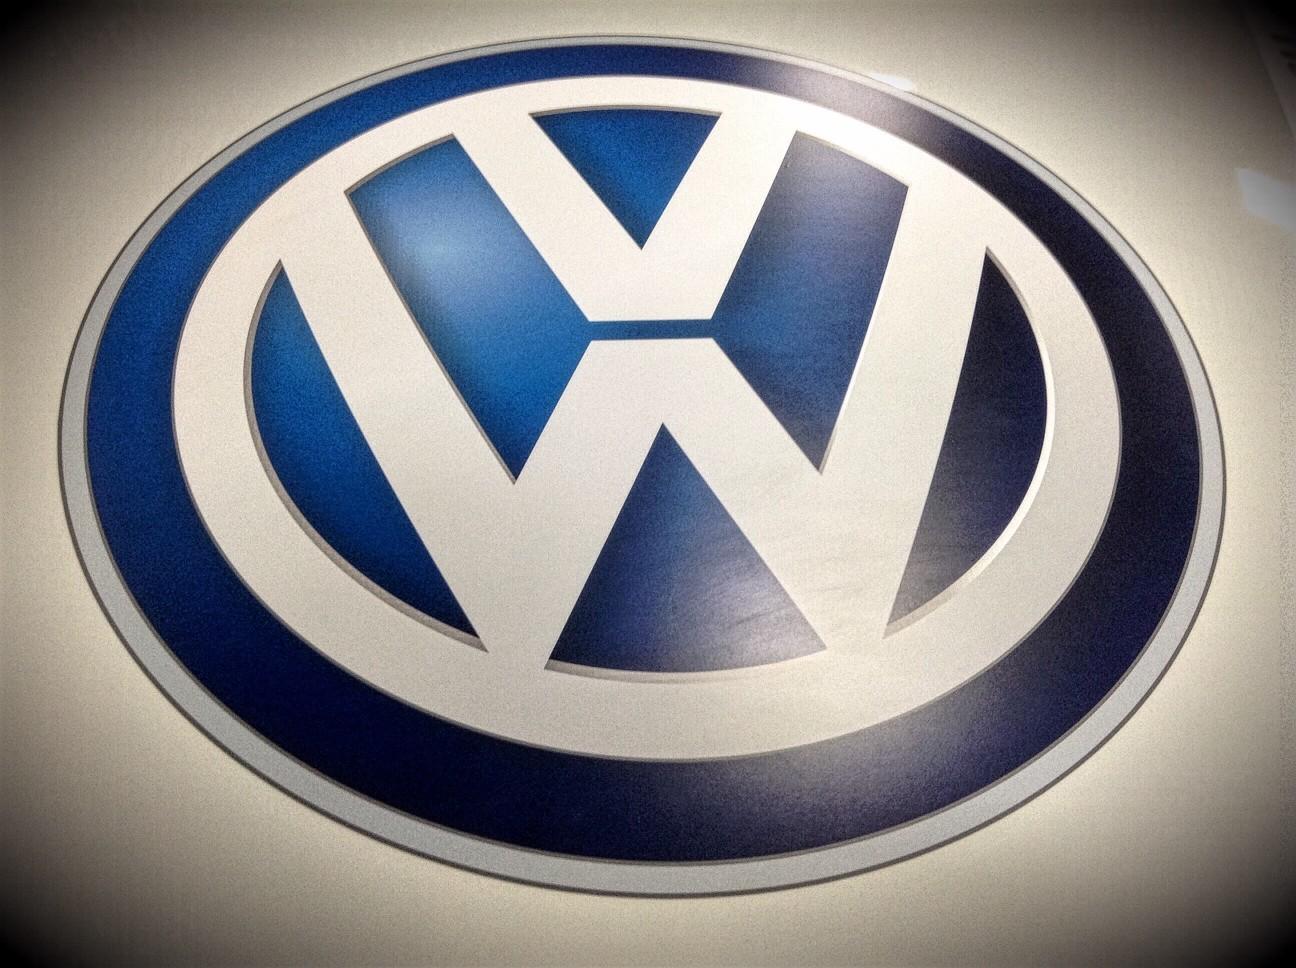 Volkswagen’s “think small” campaign changed advertising.